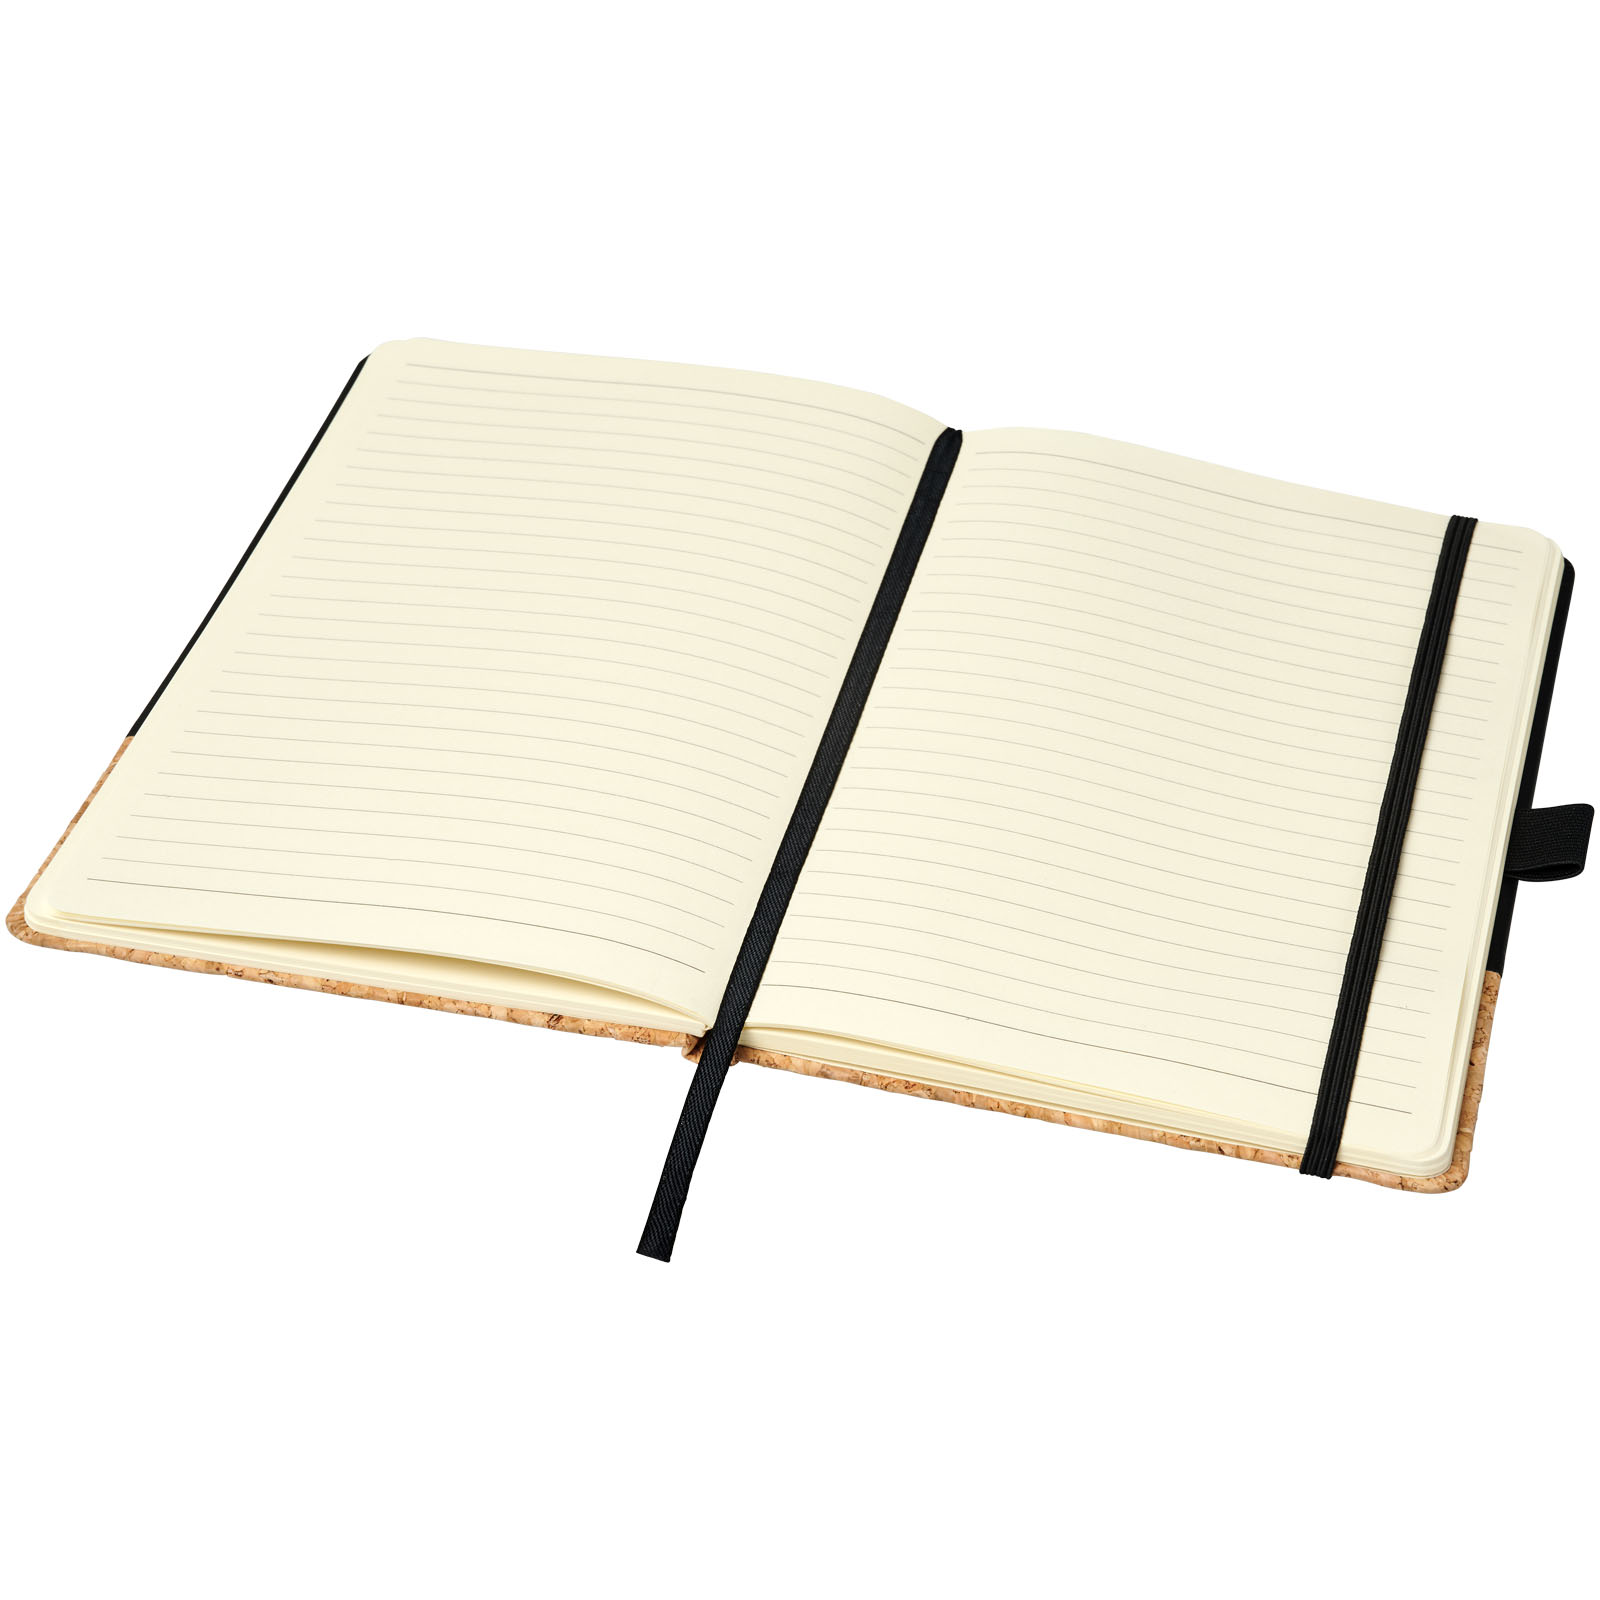 Advertising Hard cover notebooks - Evora A5 cork thermo PU notebook - 3